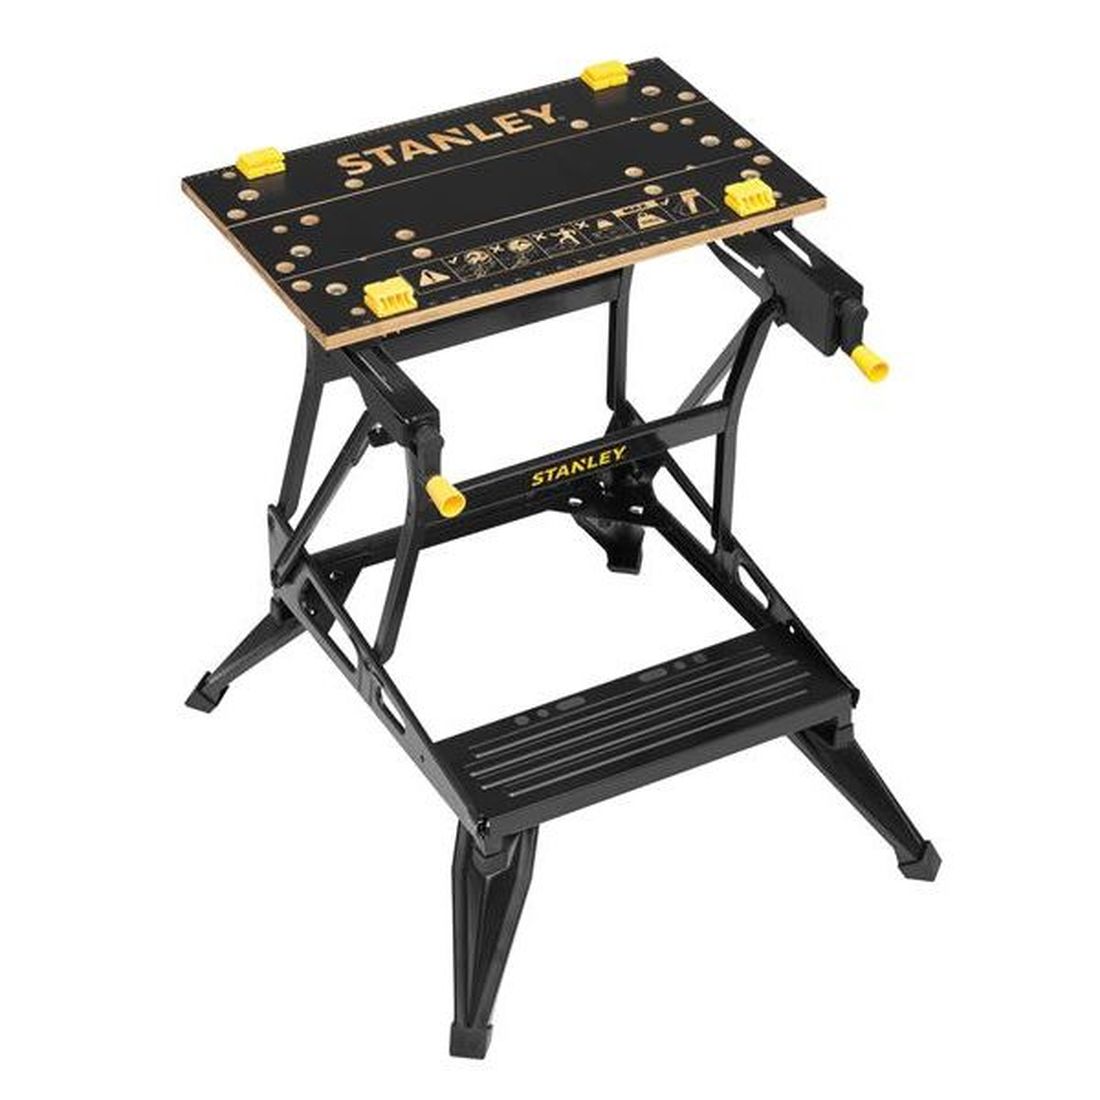 STANLEY 2-in-1 Workbench & Vice           